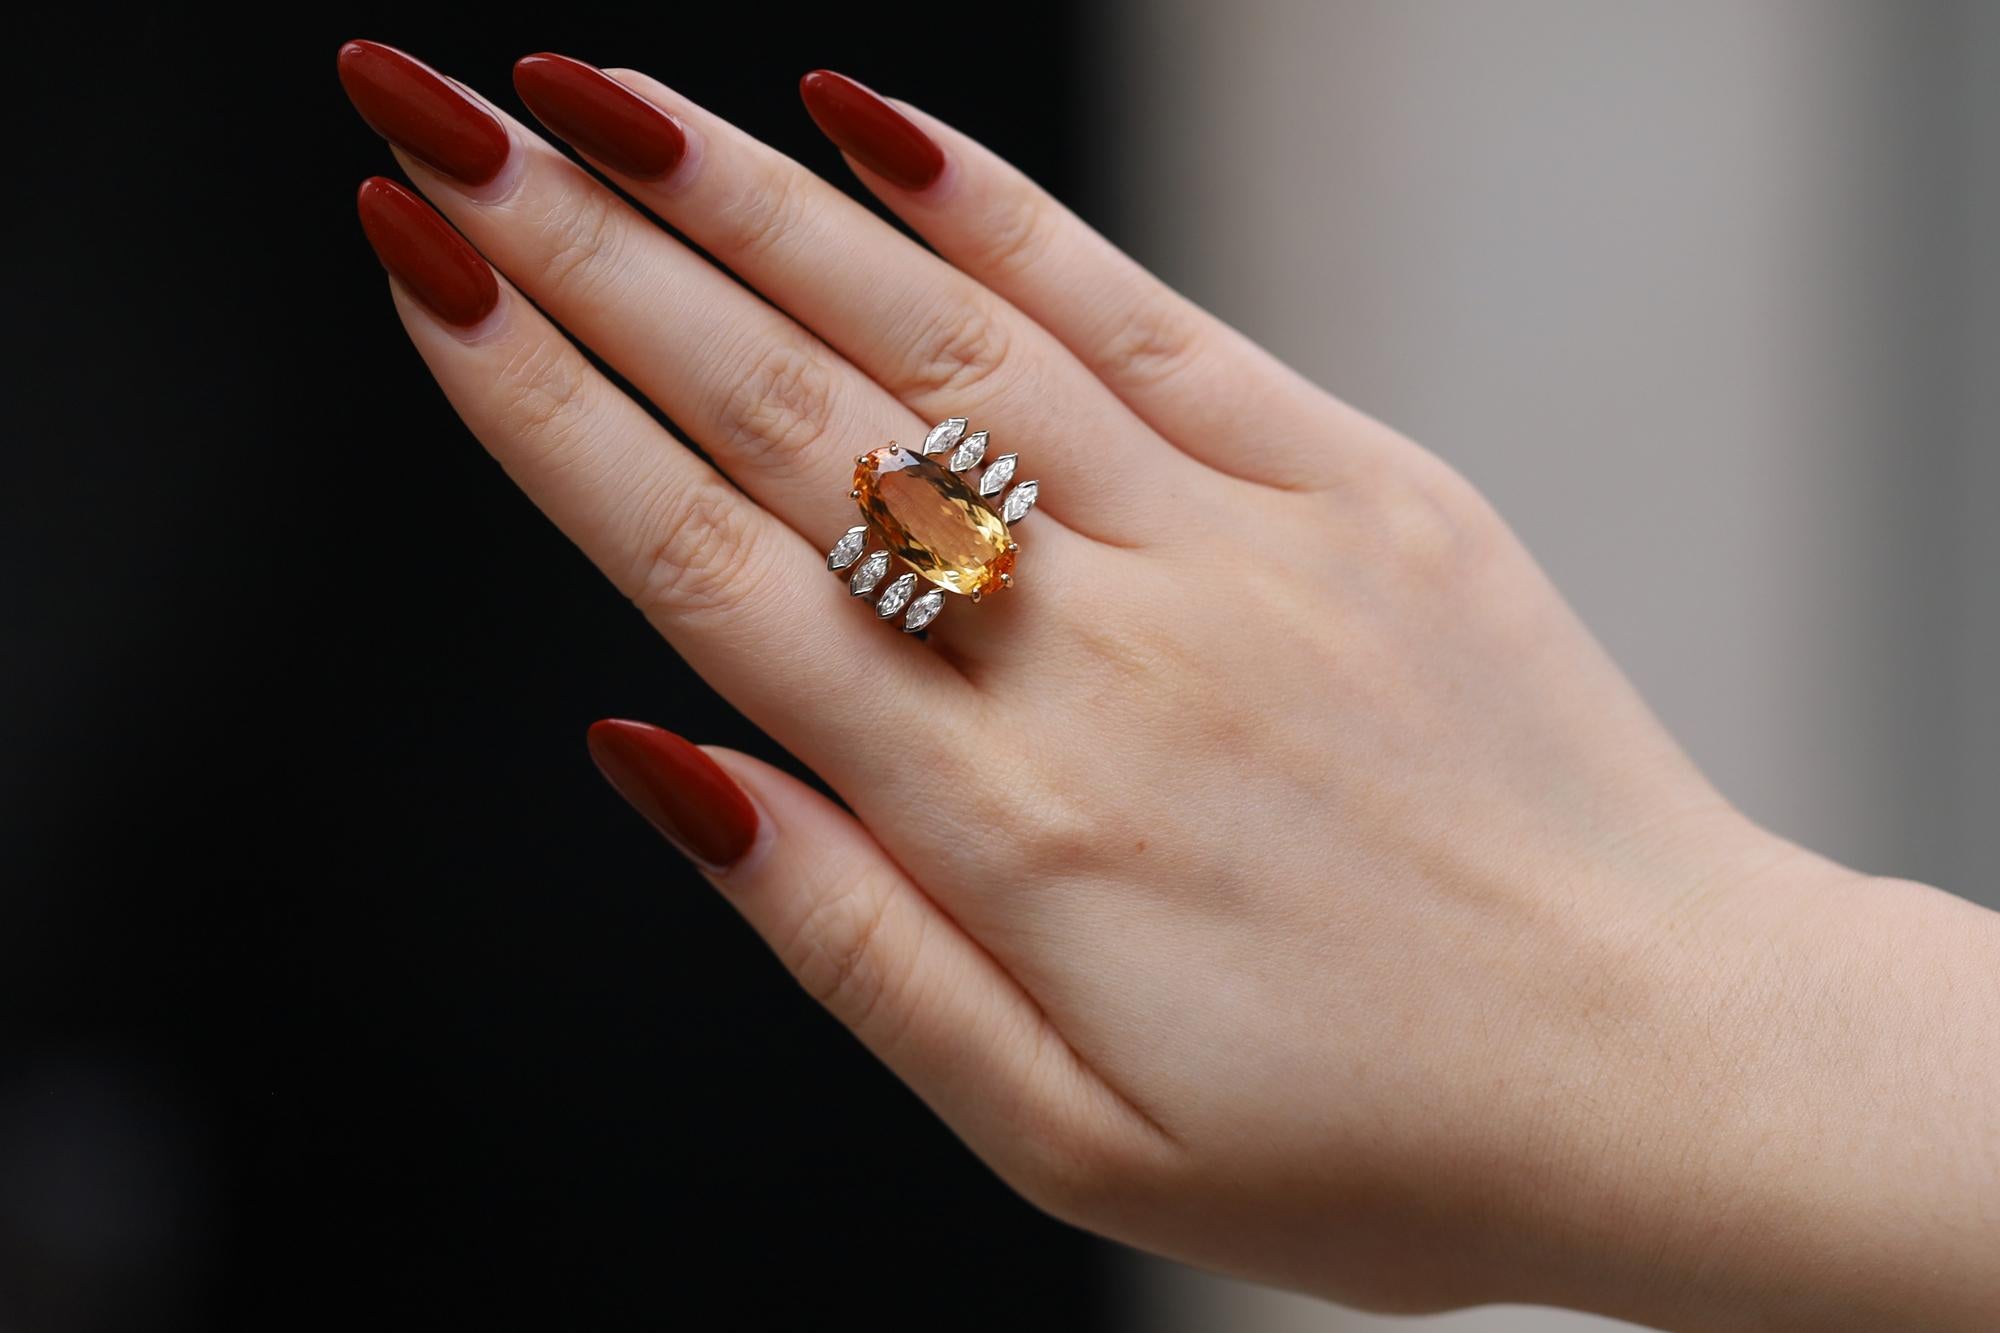 A contemporary cocktail ring, emblematic of your favorite Retro era Hollywood glam talents. The focal point of this stunning ring is an 8.85 carat natural Imperial Topaz, precisely cut into an impressive elongated oval. Crafted in 14k yellow and